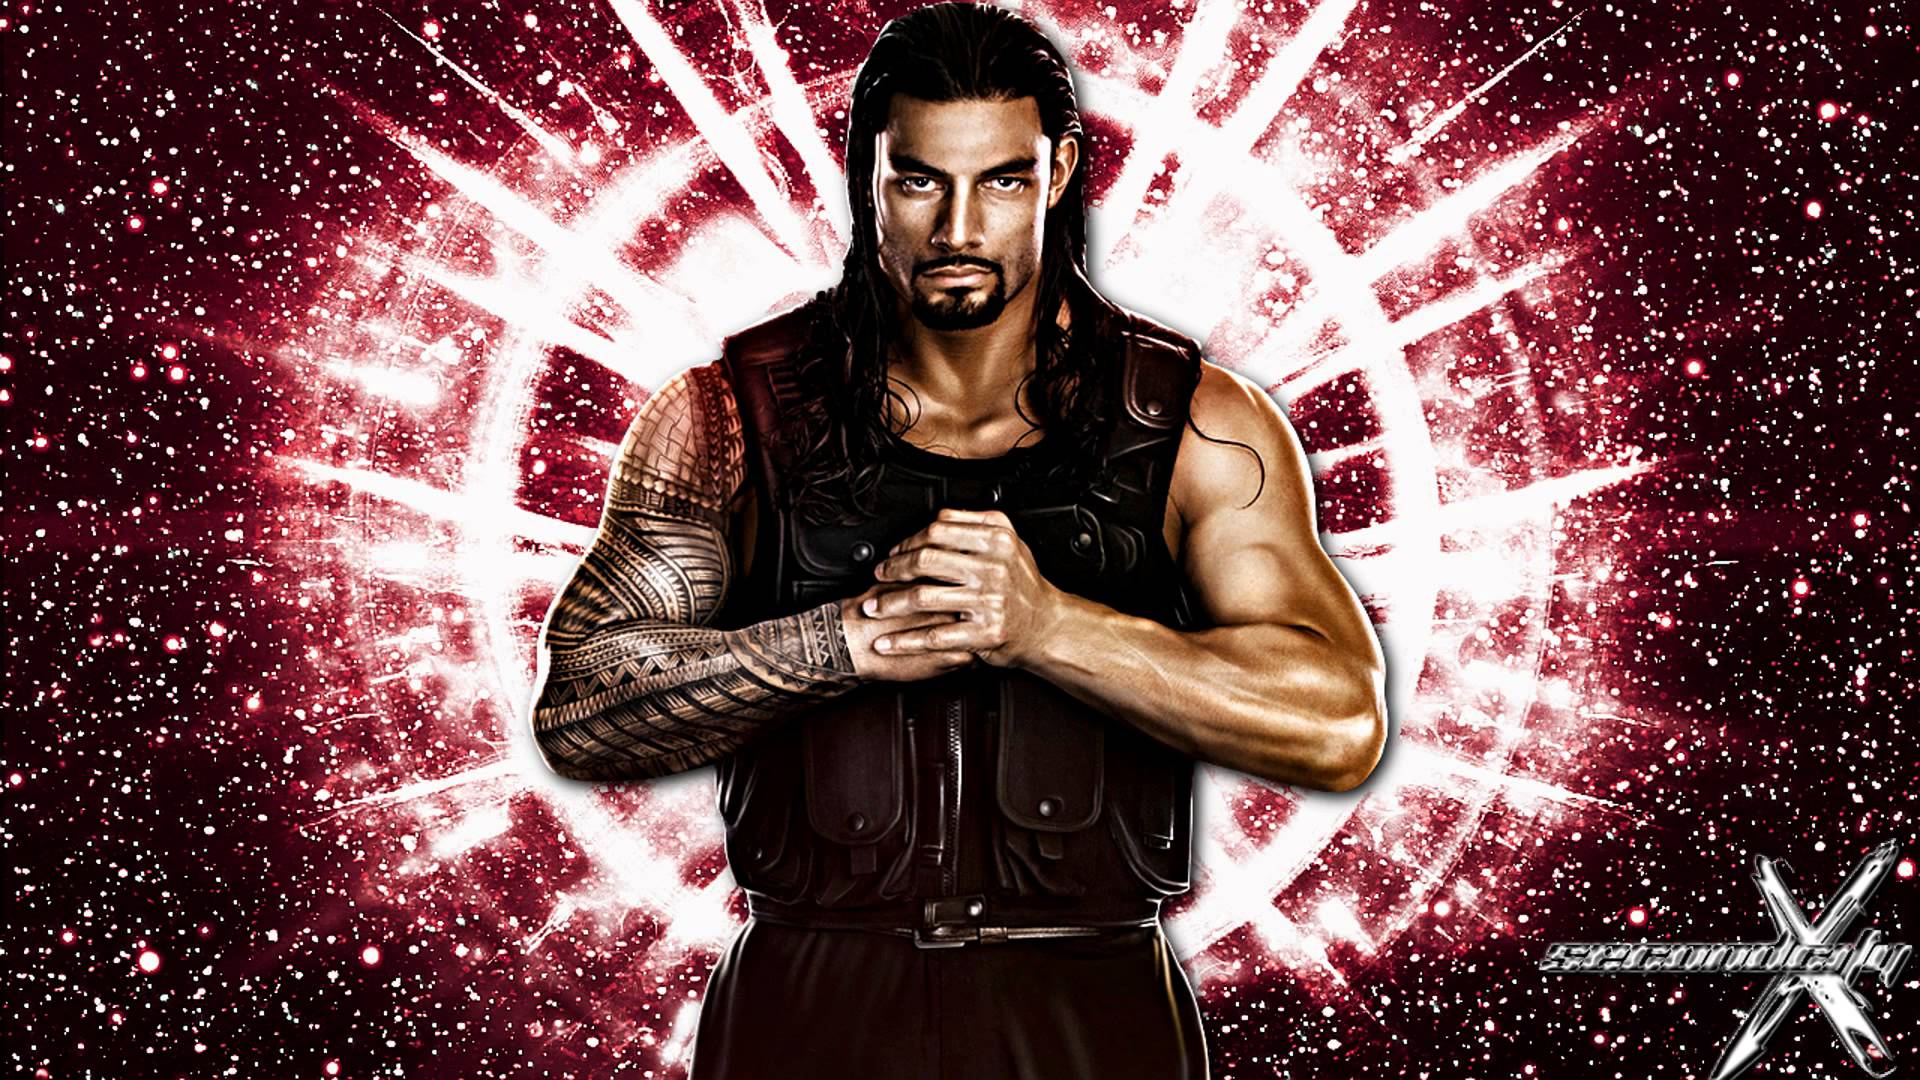 Roman Reigns Cool Wallpapers - Top Free Roman Reigns Cool ...